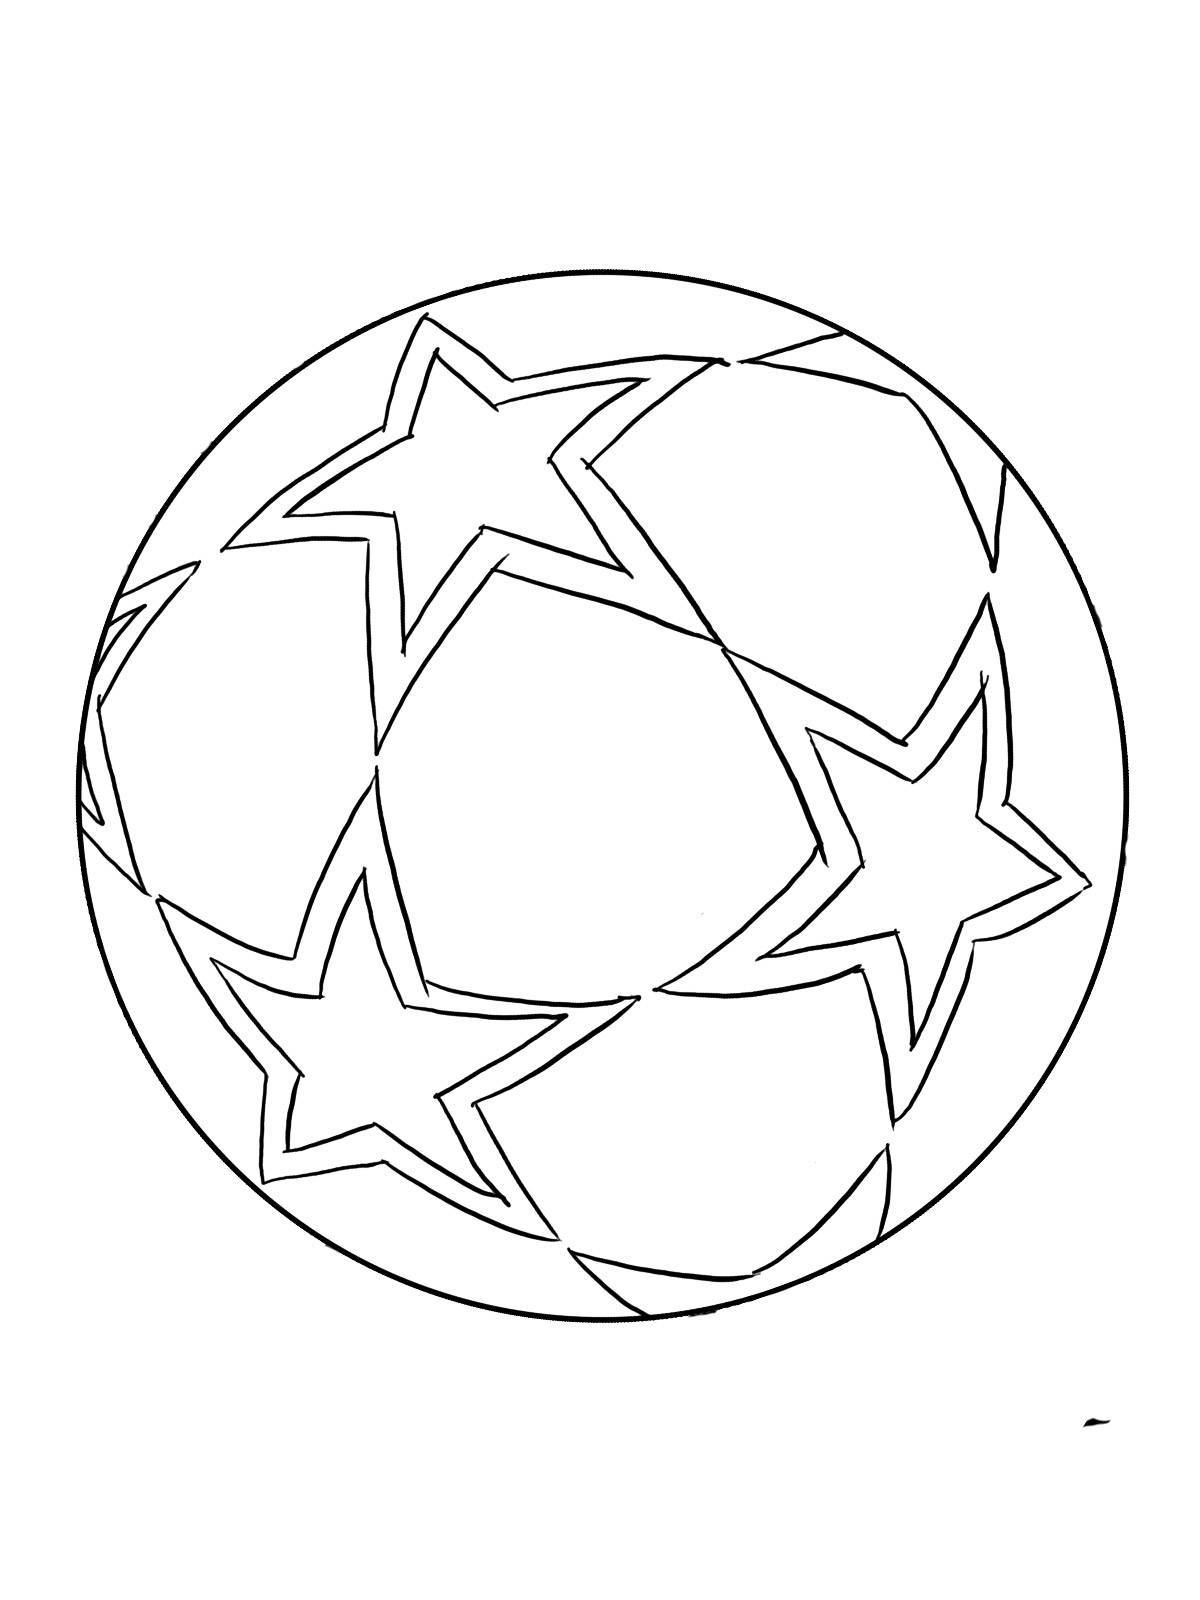 Fun soccer ball coloring page